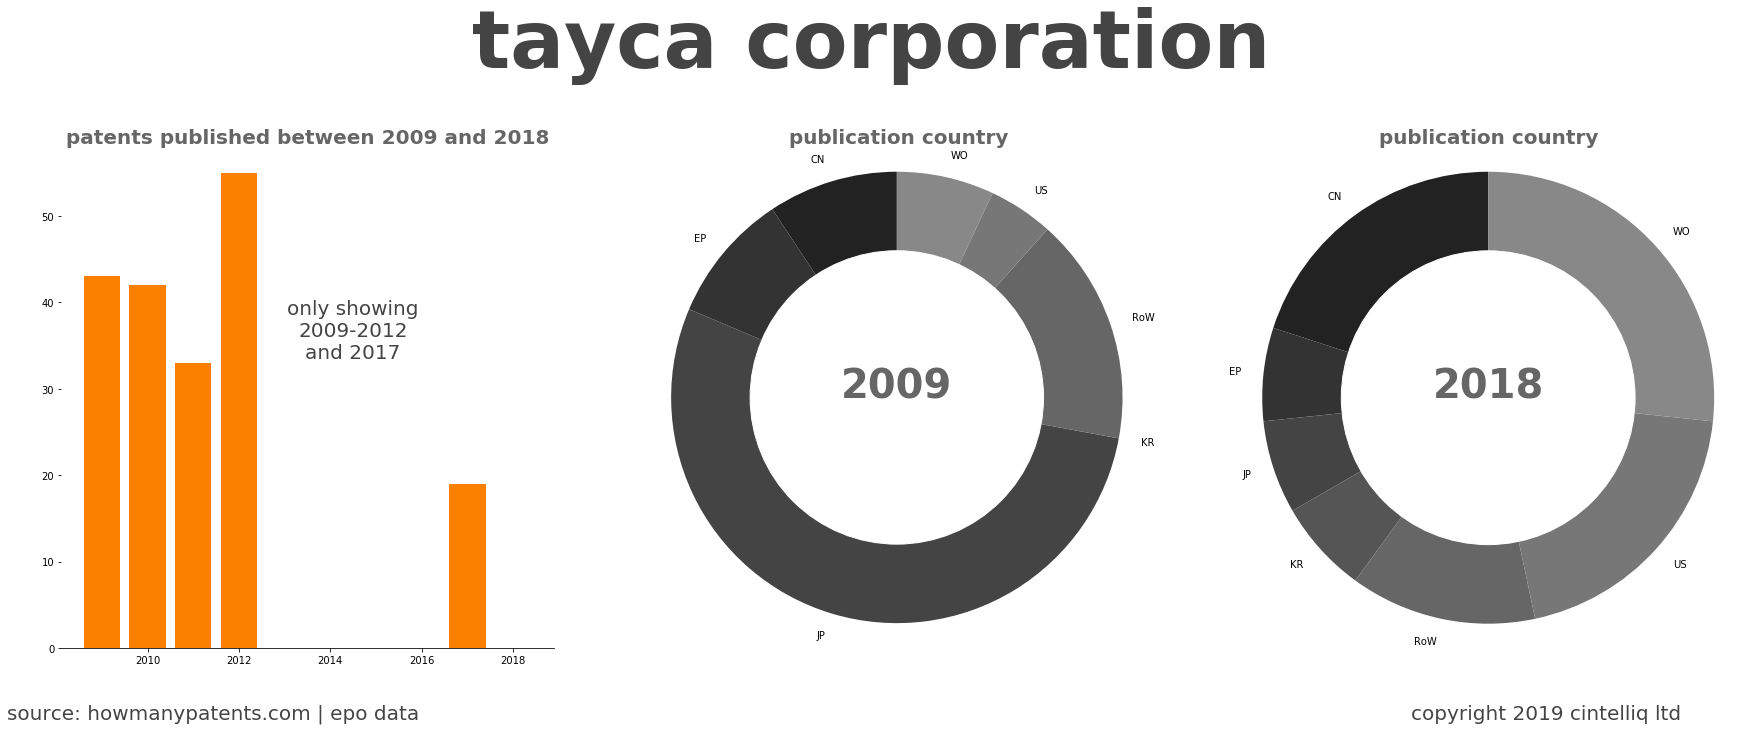 summary of patents for Tayca Corporation